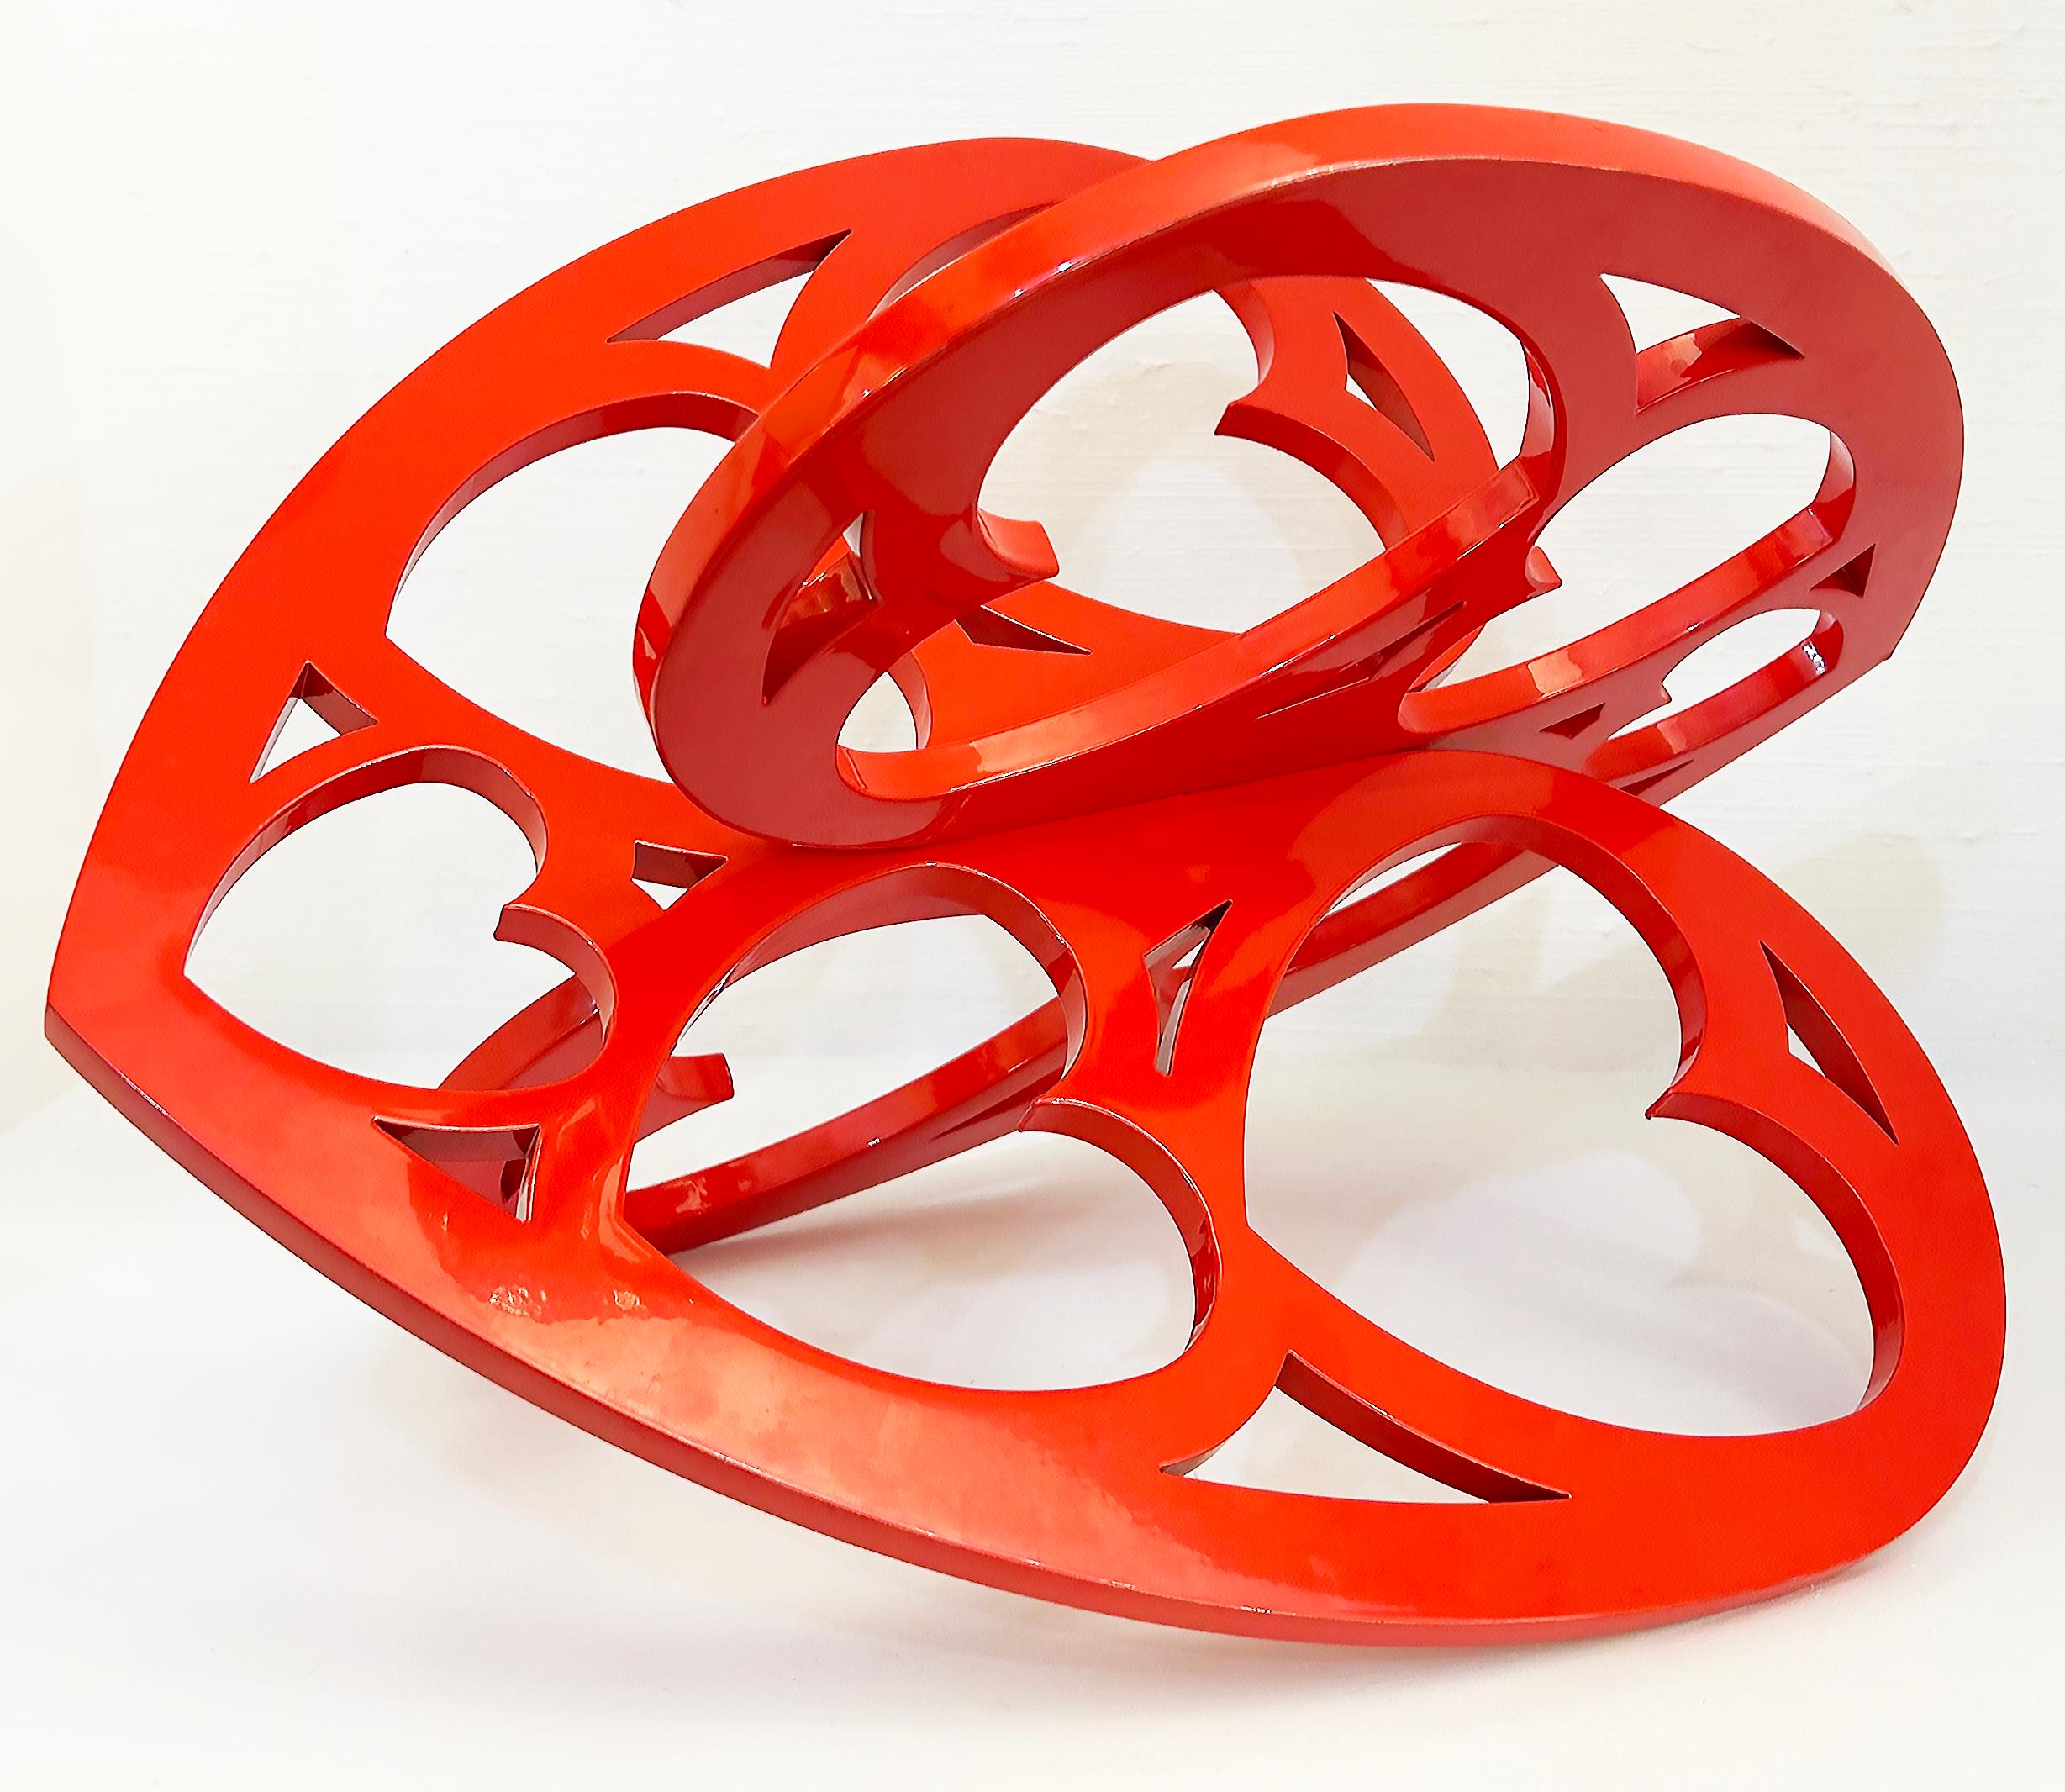 Powder-Coated Interlocking Hearts Powder-coated Aluminum Lace Sculpture by Michael Gitter For Sale